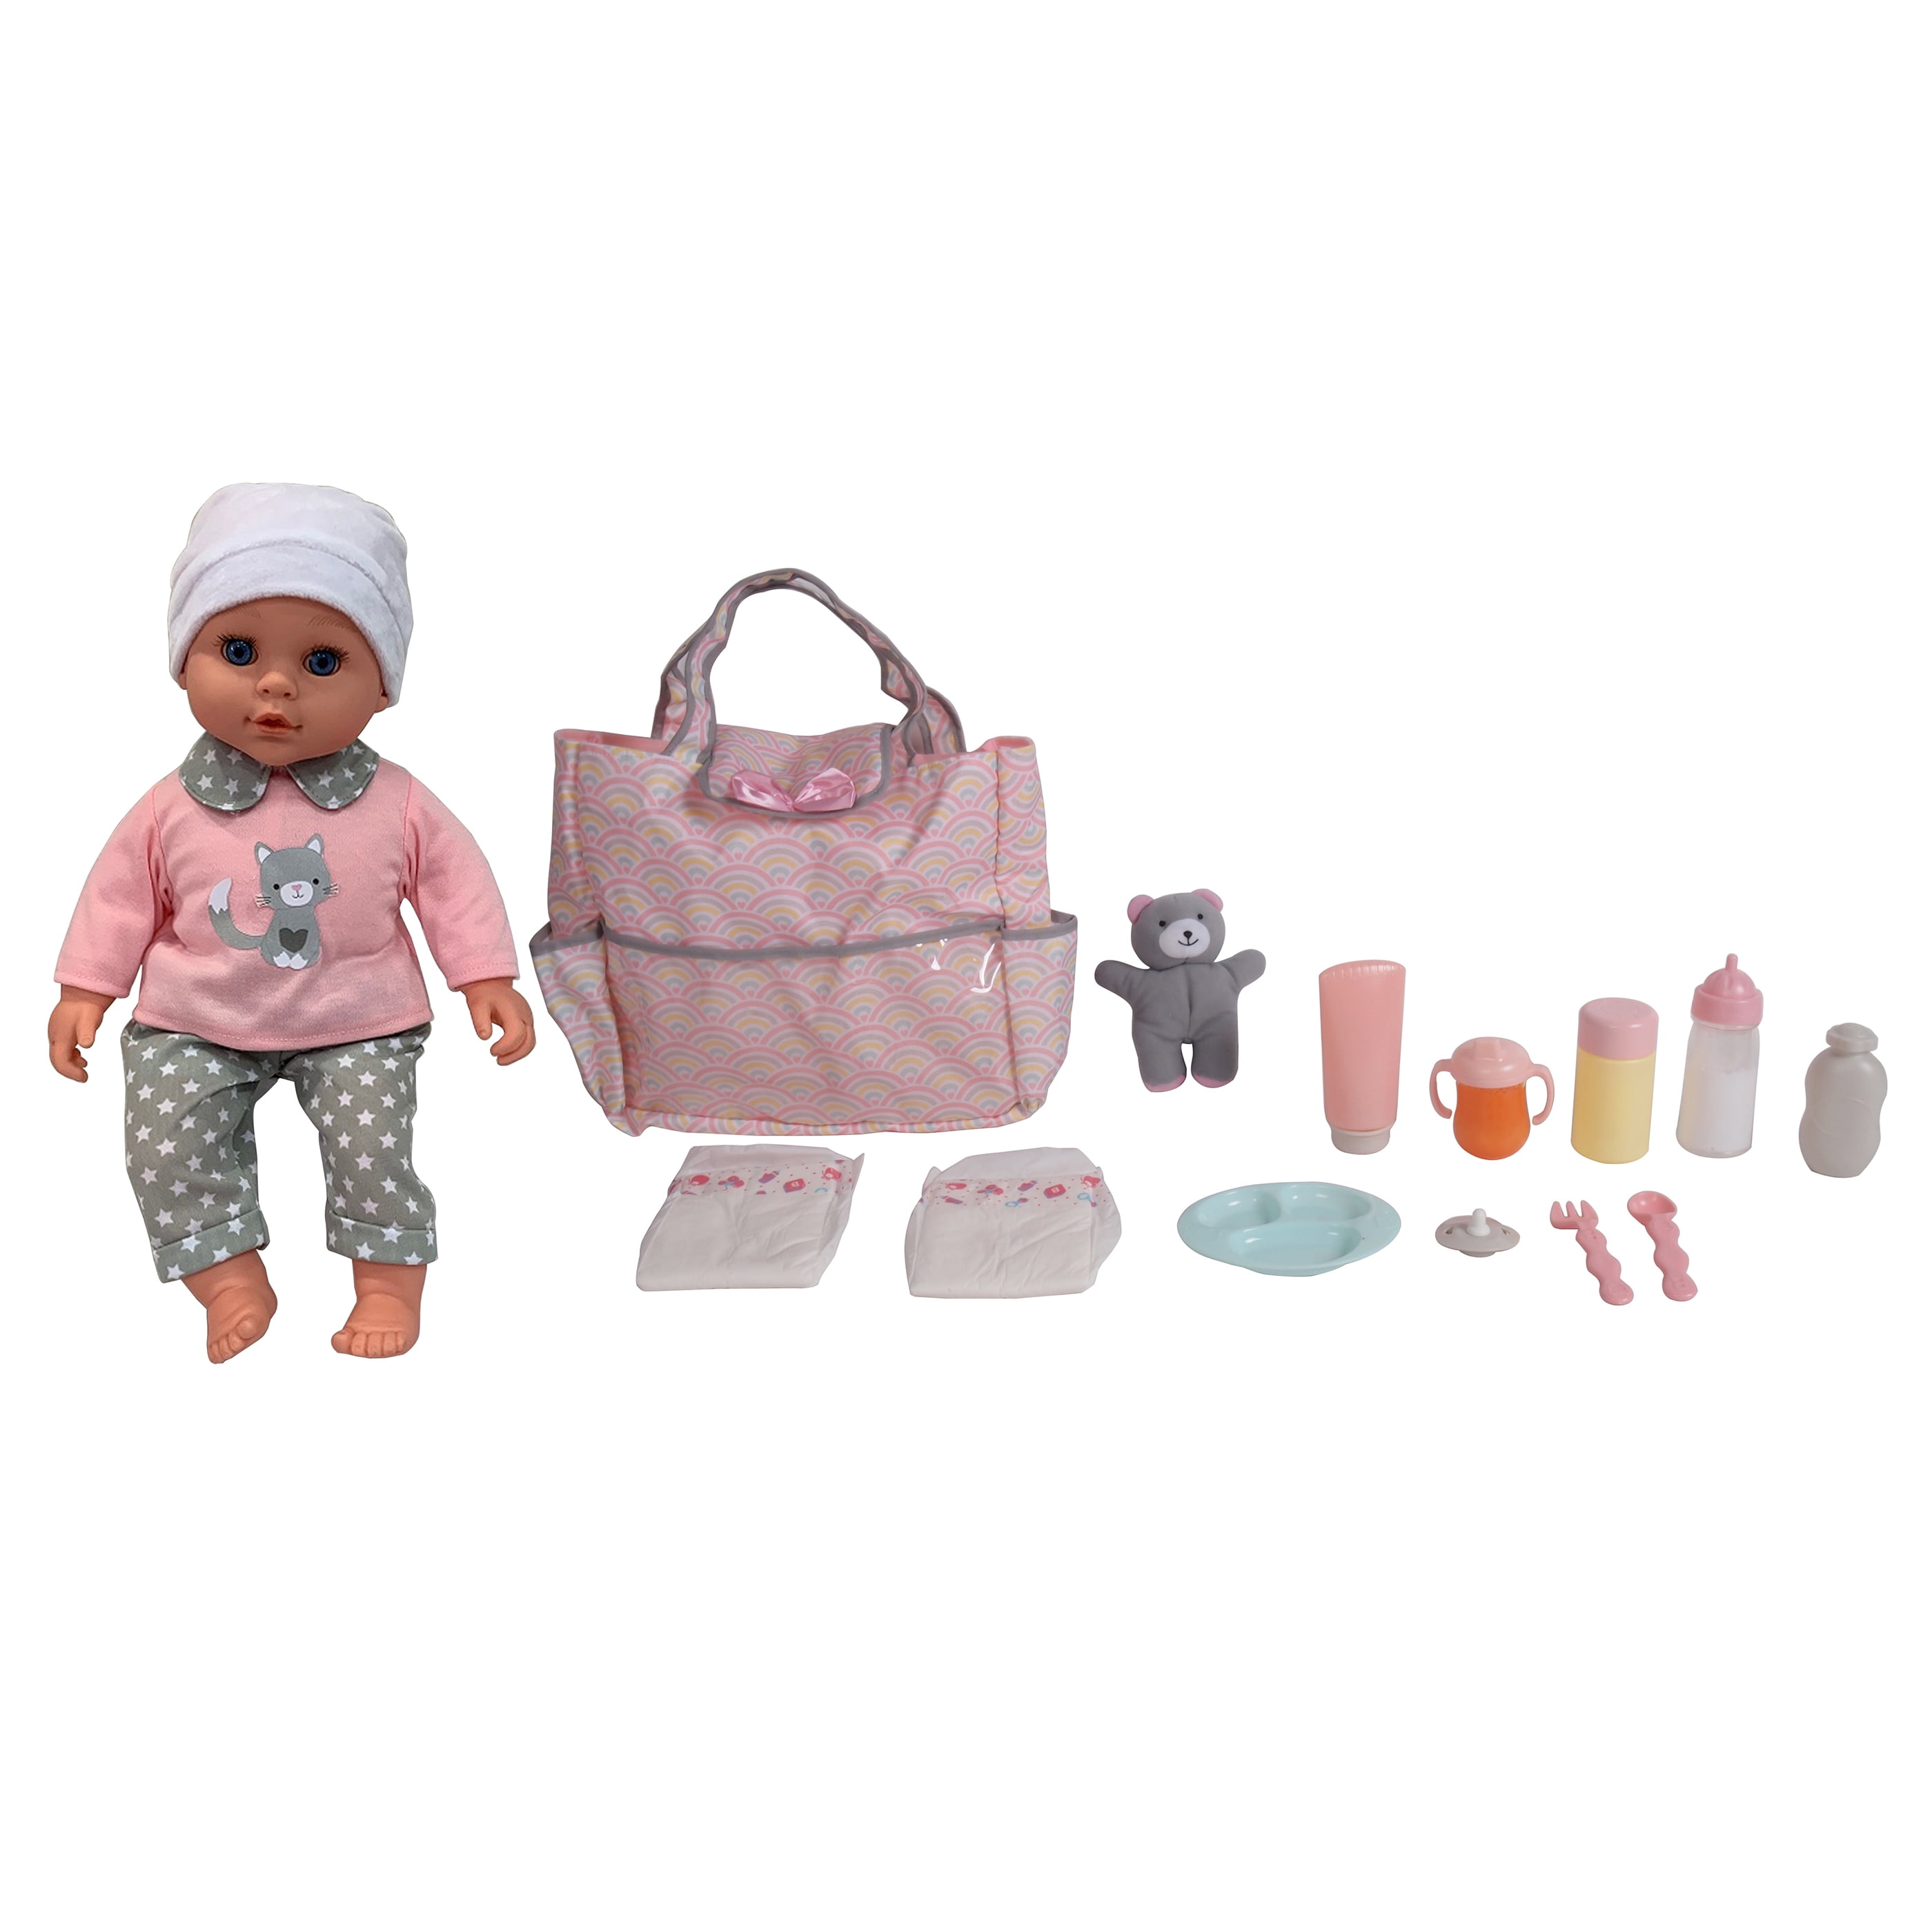 Reborn baby doll complete starter Backpack Diaper bag with all accessories bottles diapers